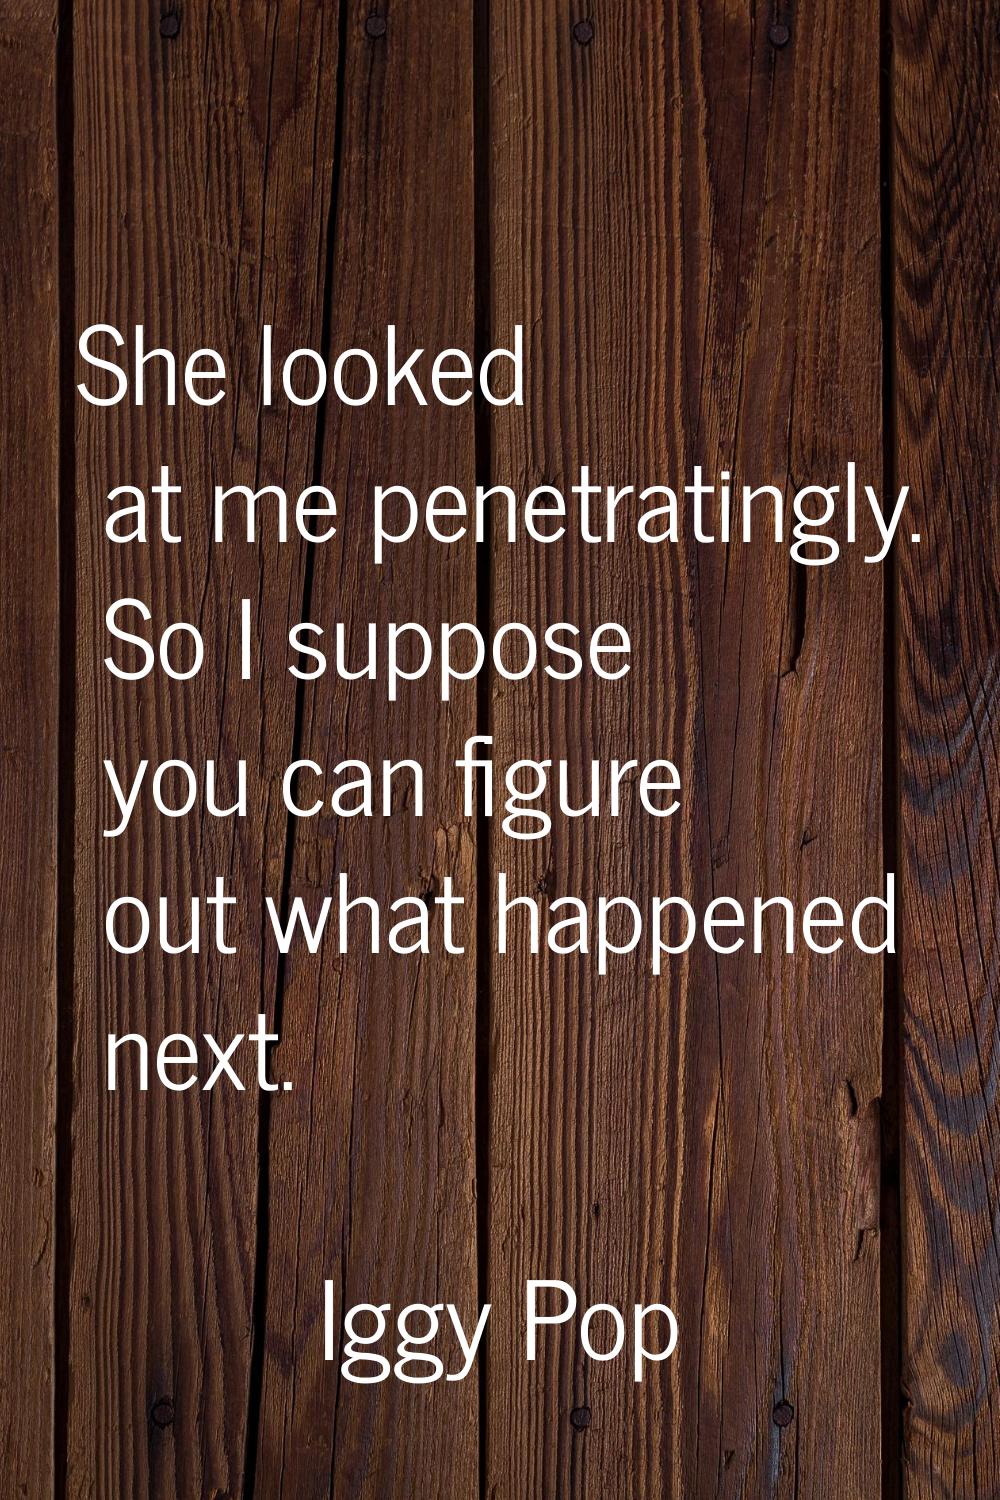 She looked at me penetratingly. So I suppose you can figure out what happened next.